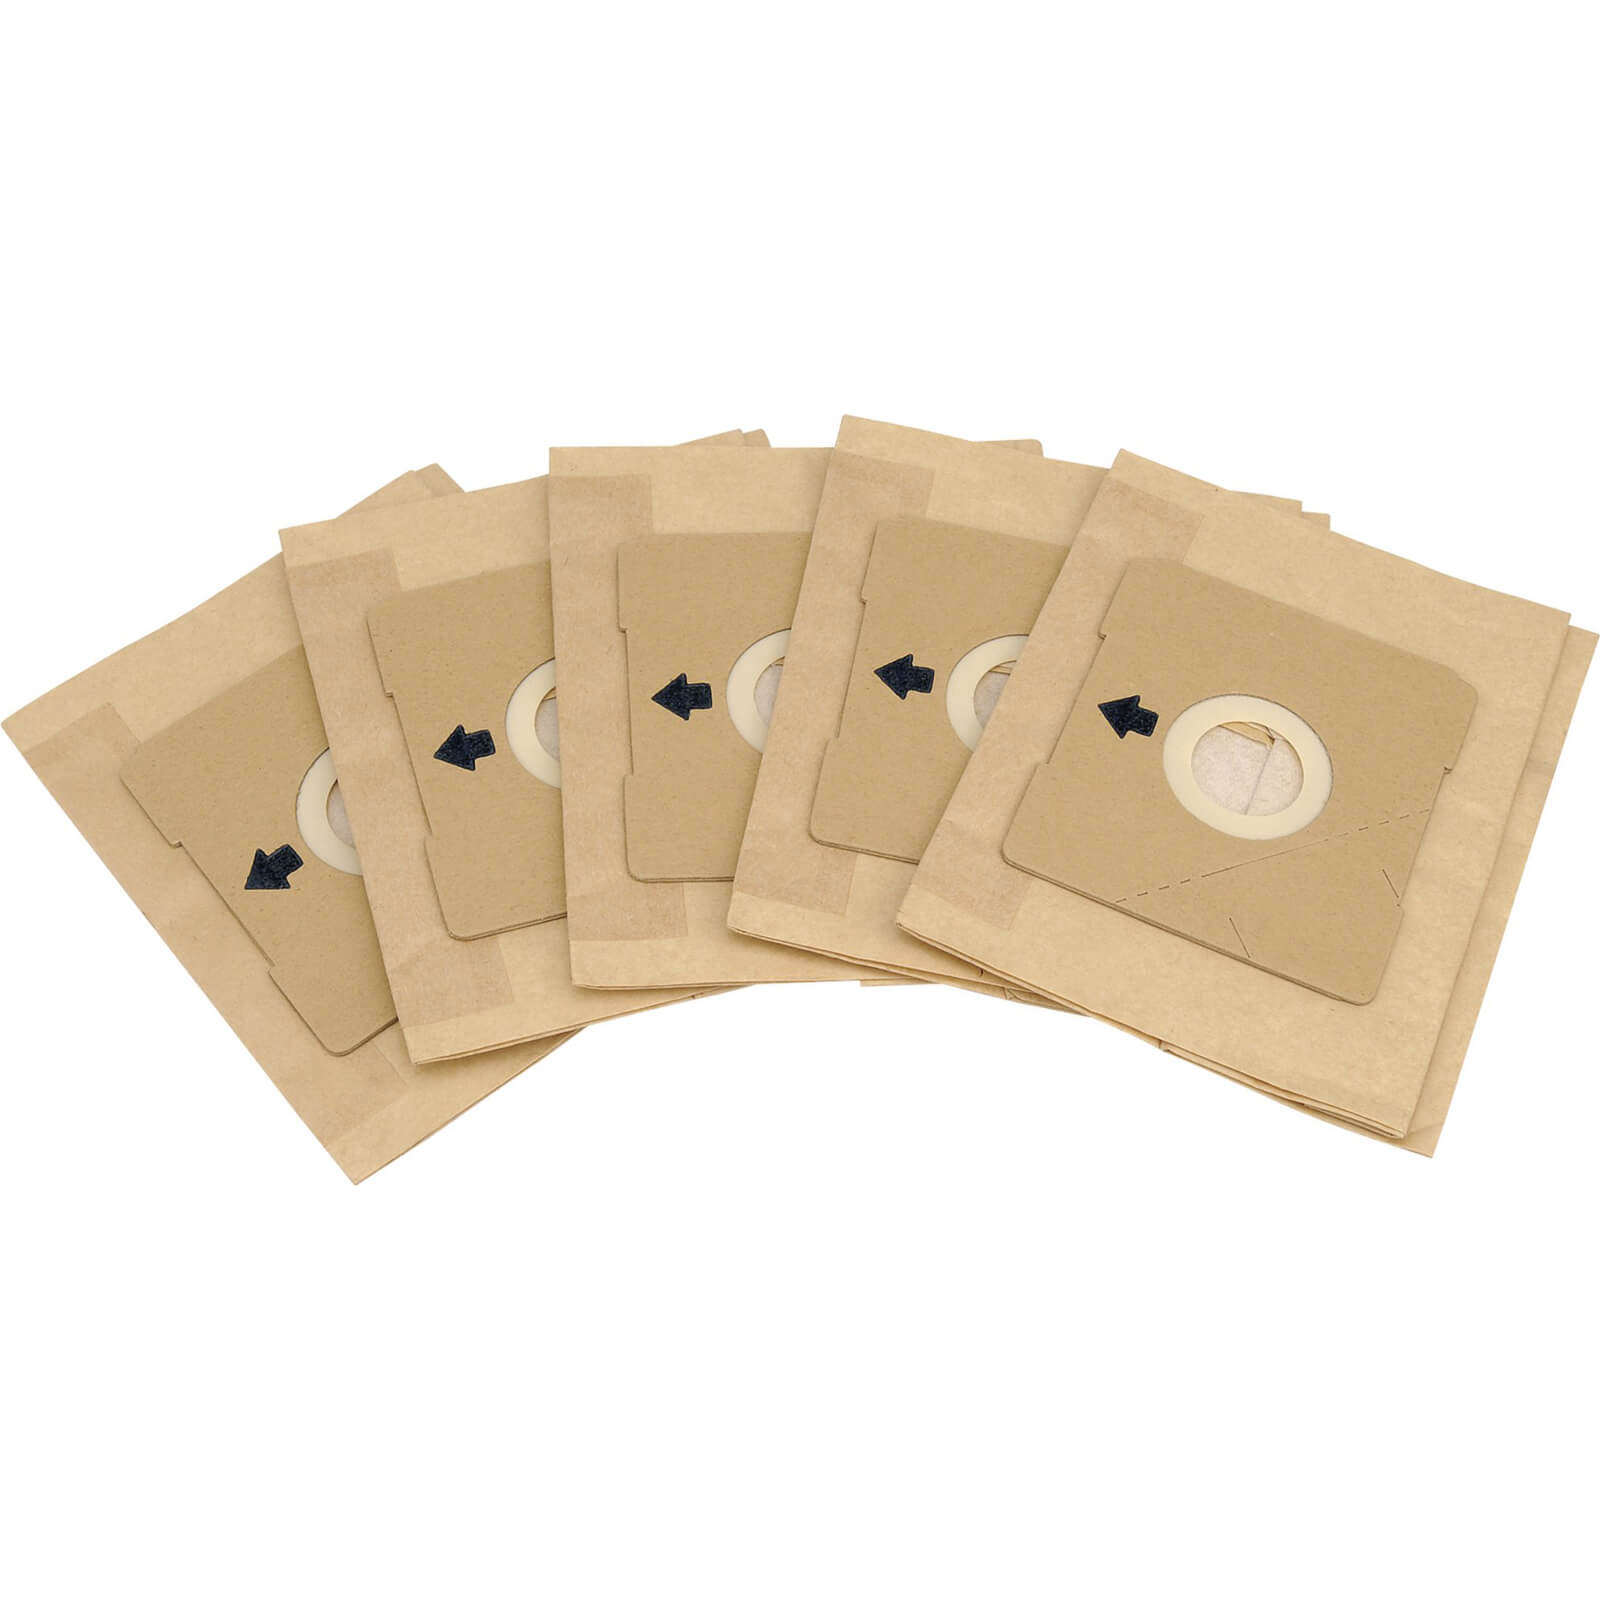 Image of Draper Paper Dust Bags for VC1600 Vacuum Cleaner Pack of 5